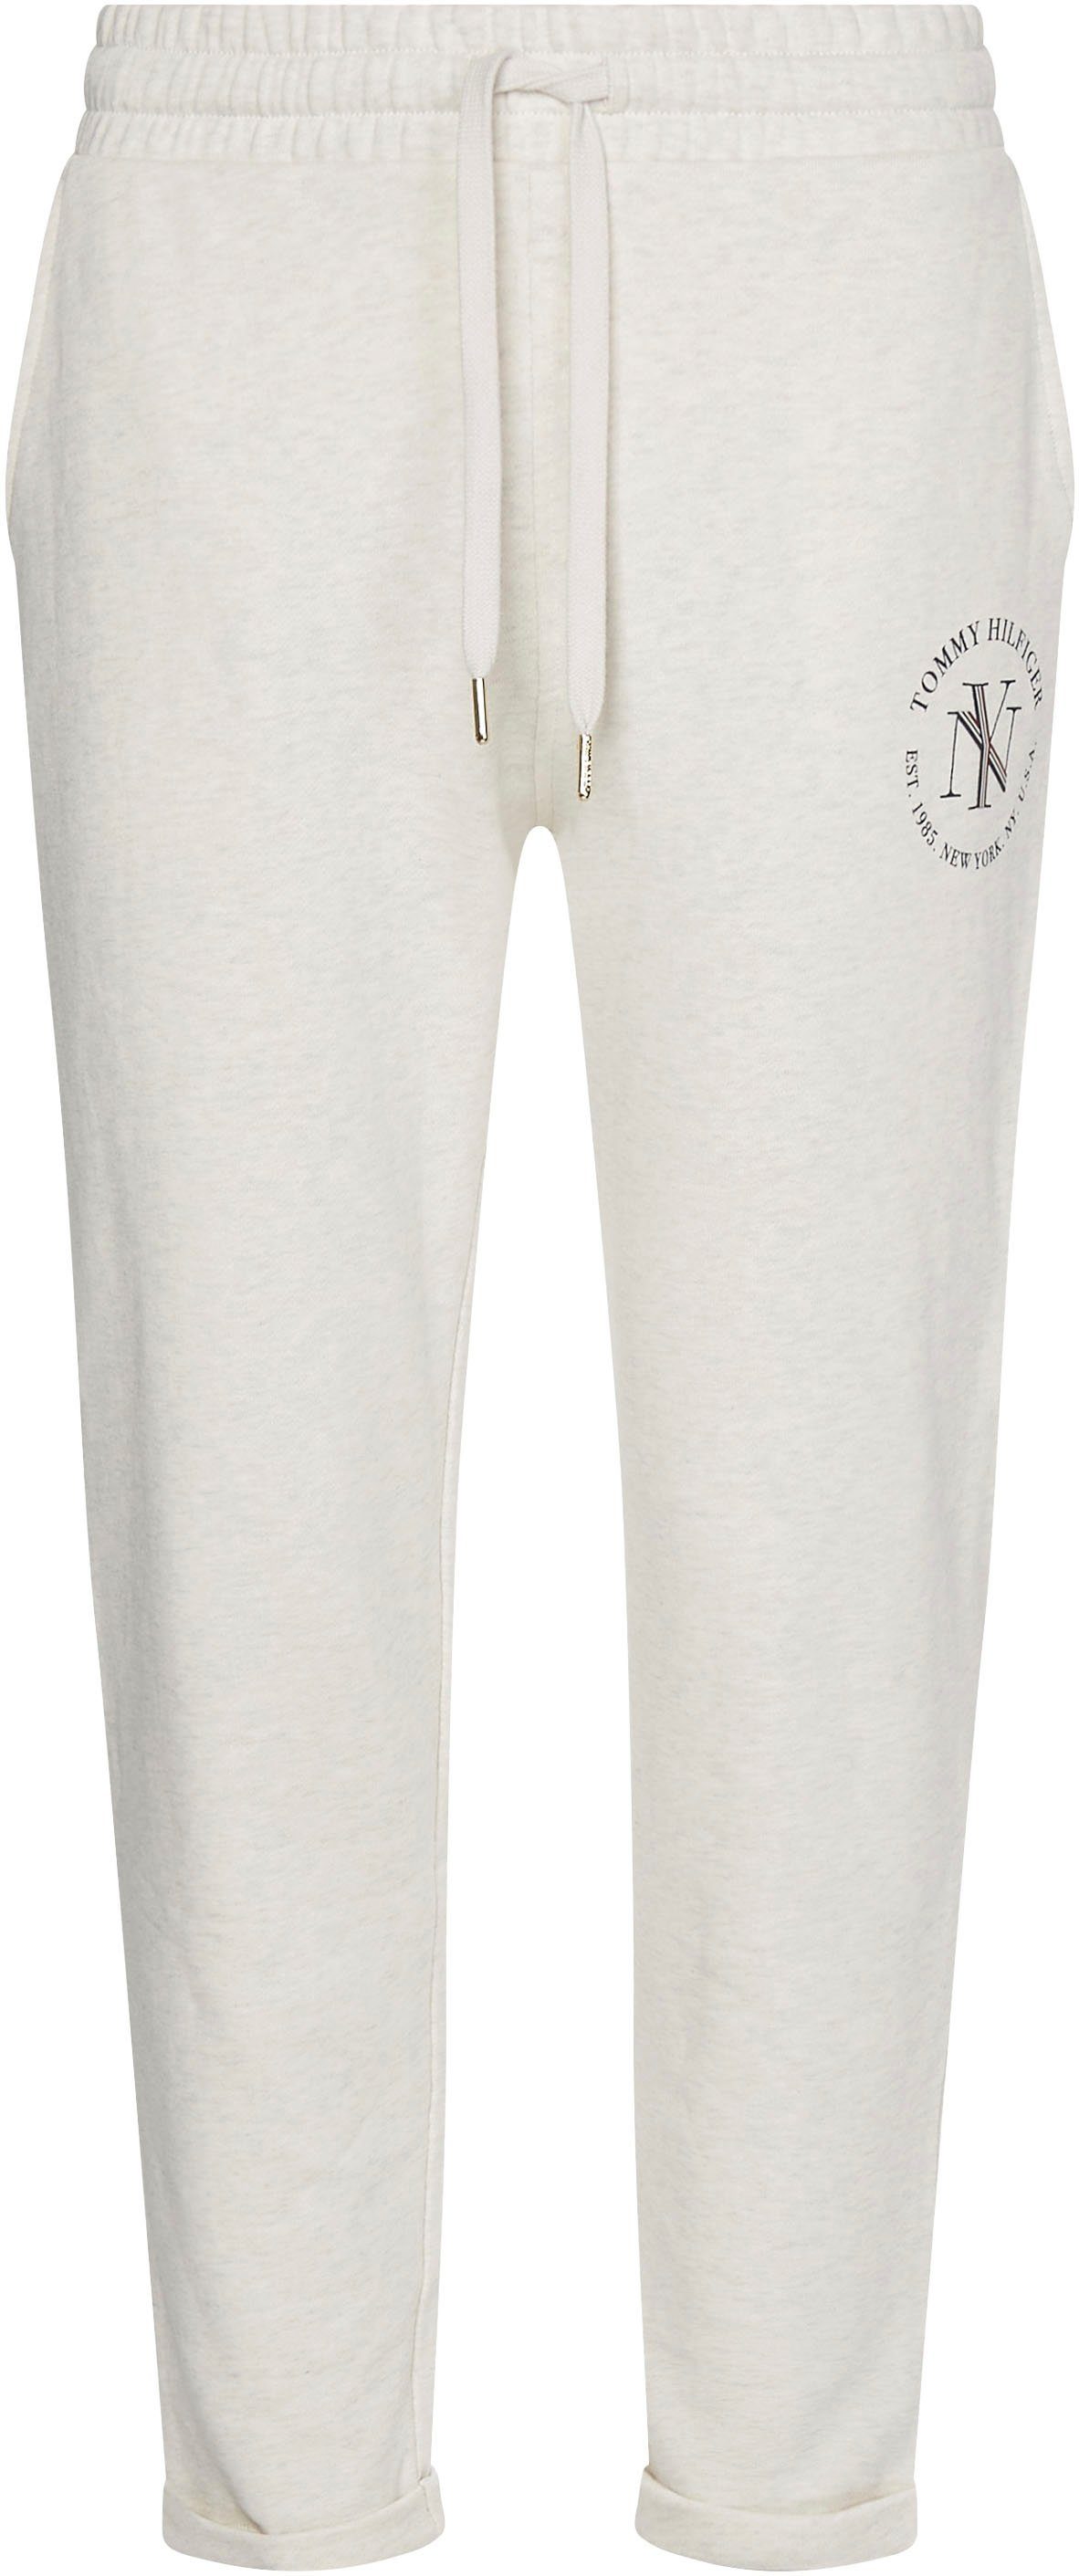 White-Heather ROUNDALL Tommy SWEATPANTS mit Markenlabel TAPERED Sweatpants NYC Tommy Hilfiger Hilfiger